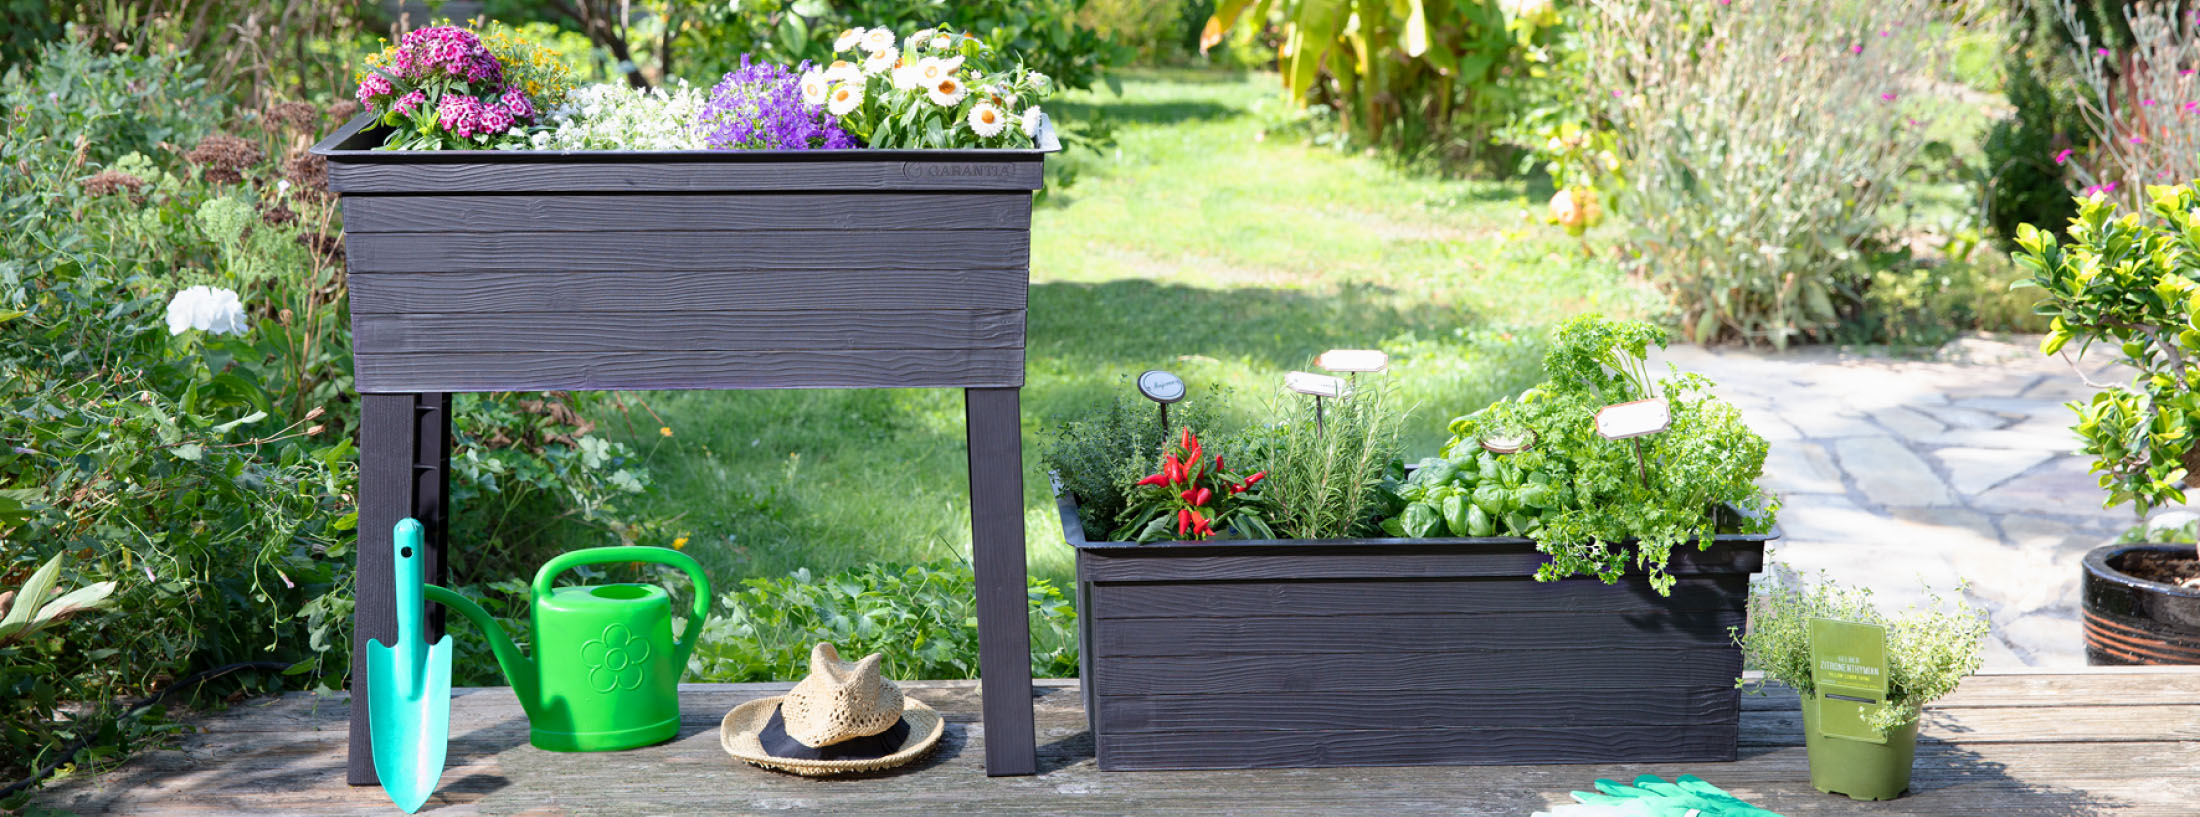 planters and pots thumbnail grid page banner